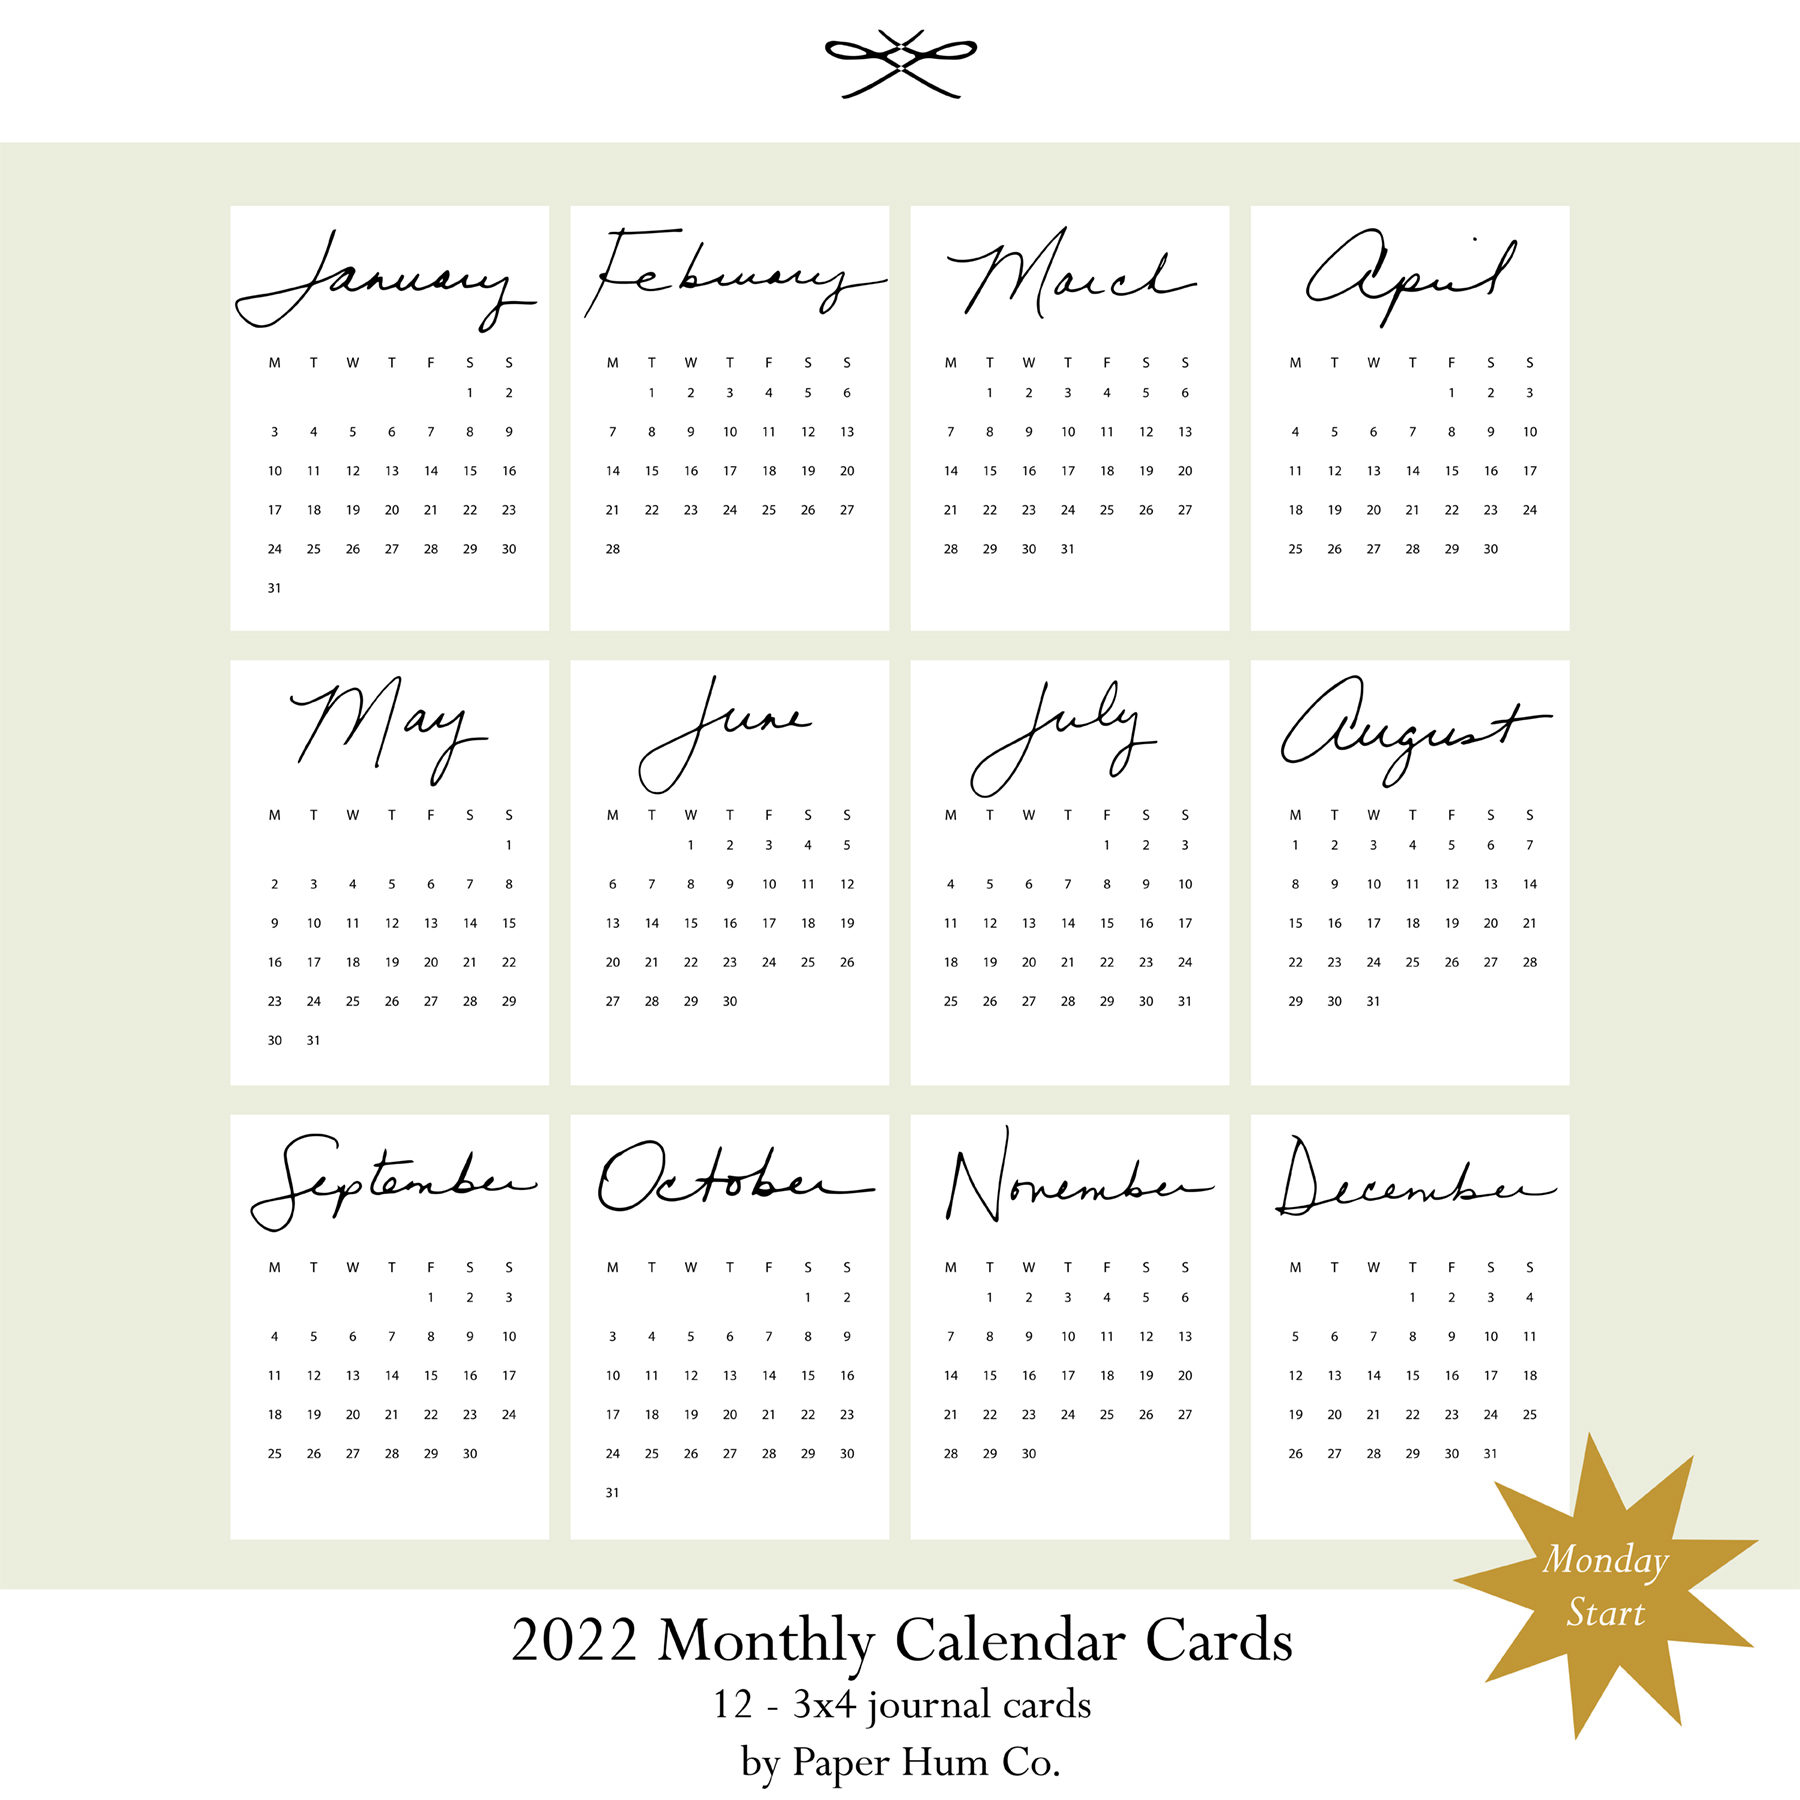 Paper Hum Co. - 2022 3x4 Monthly Calendar Cards (Monday Start)